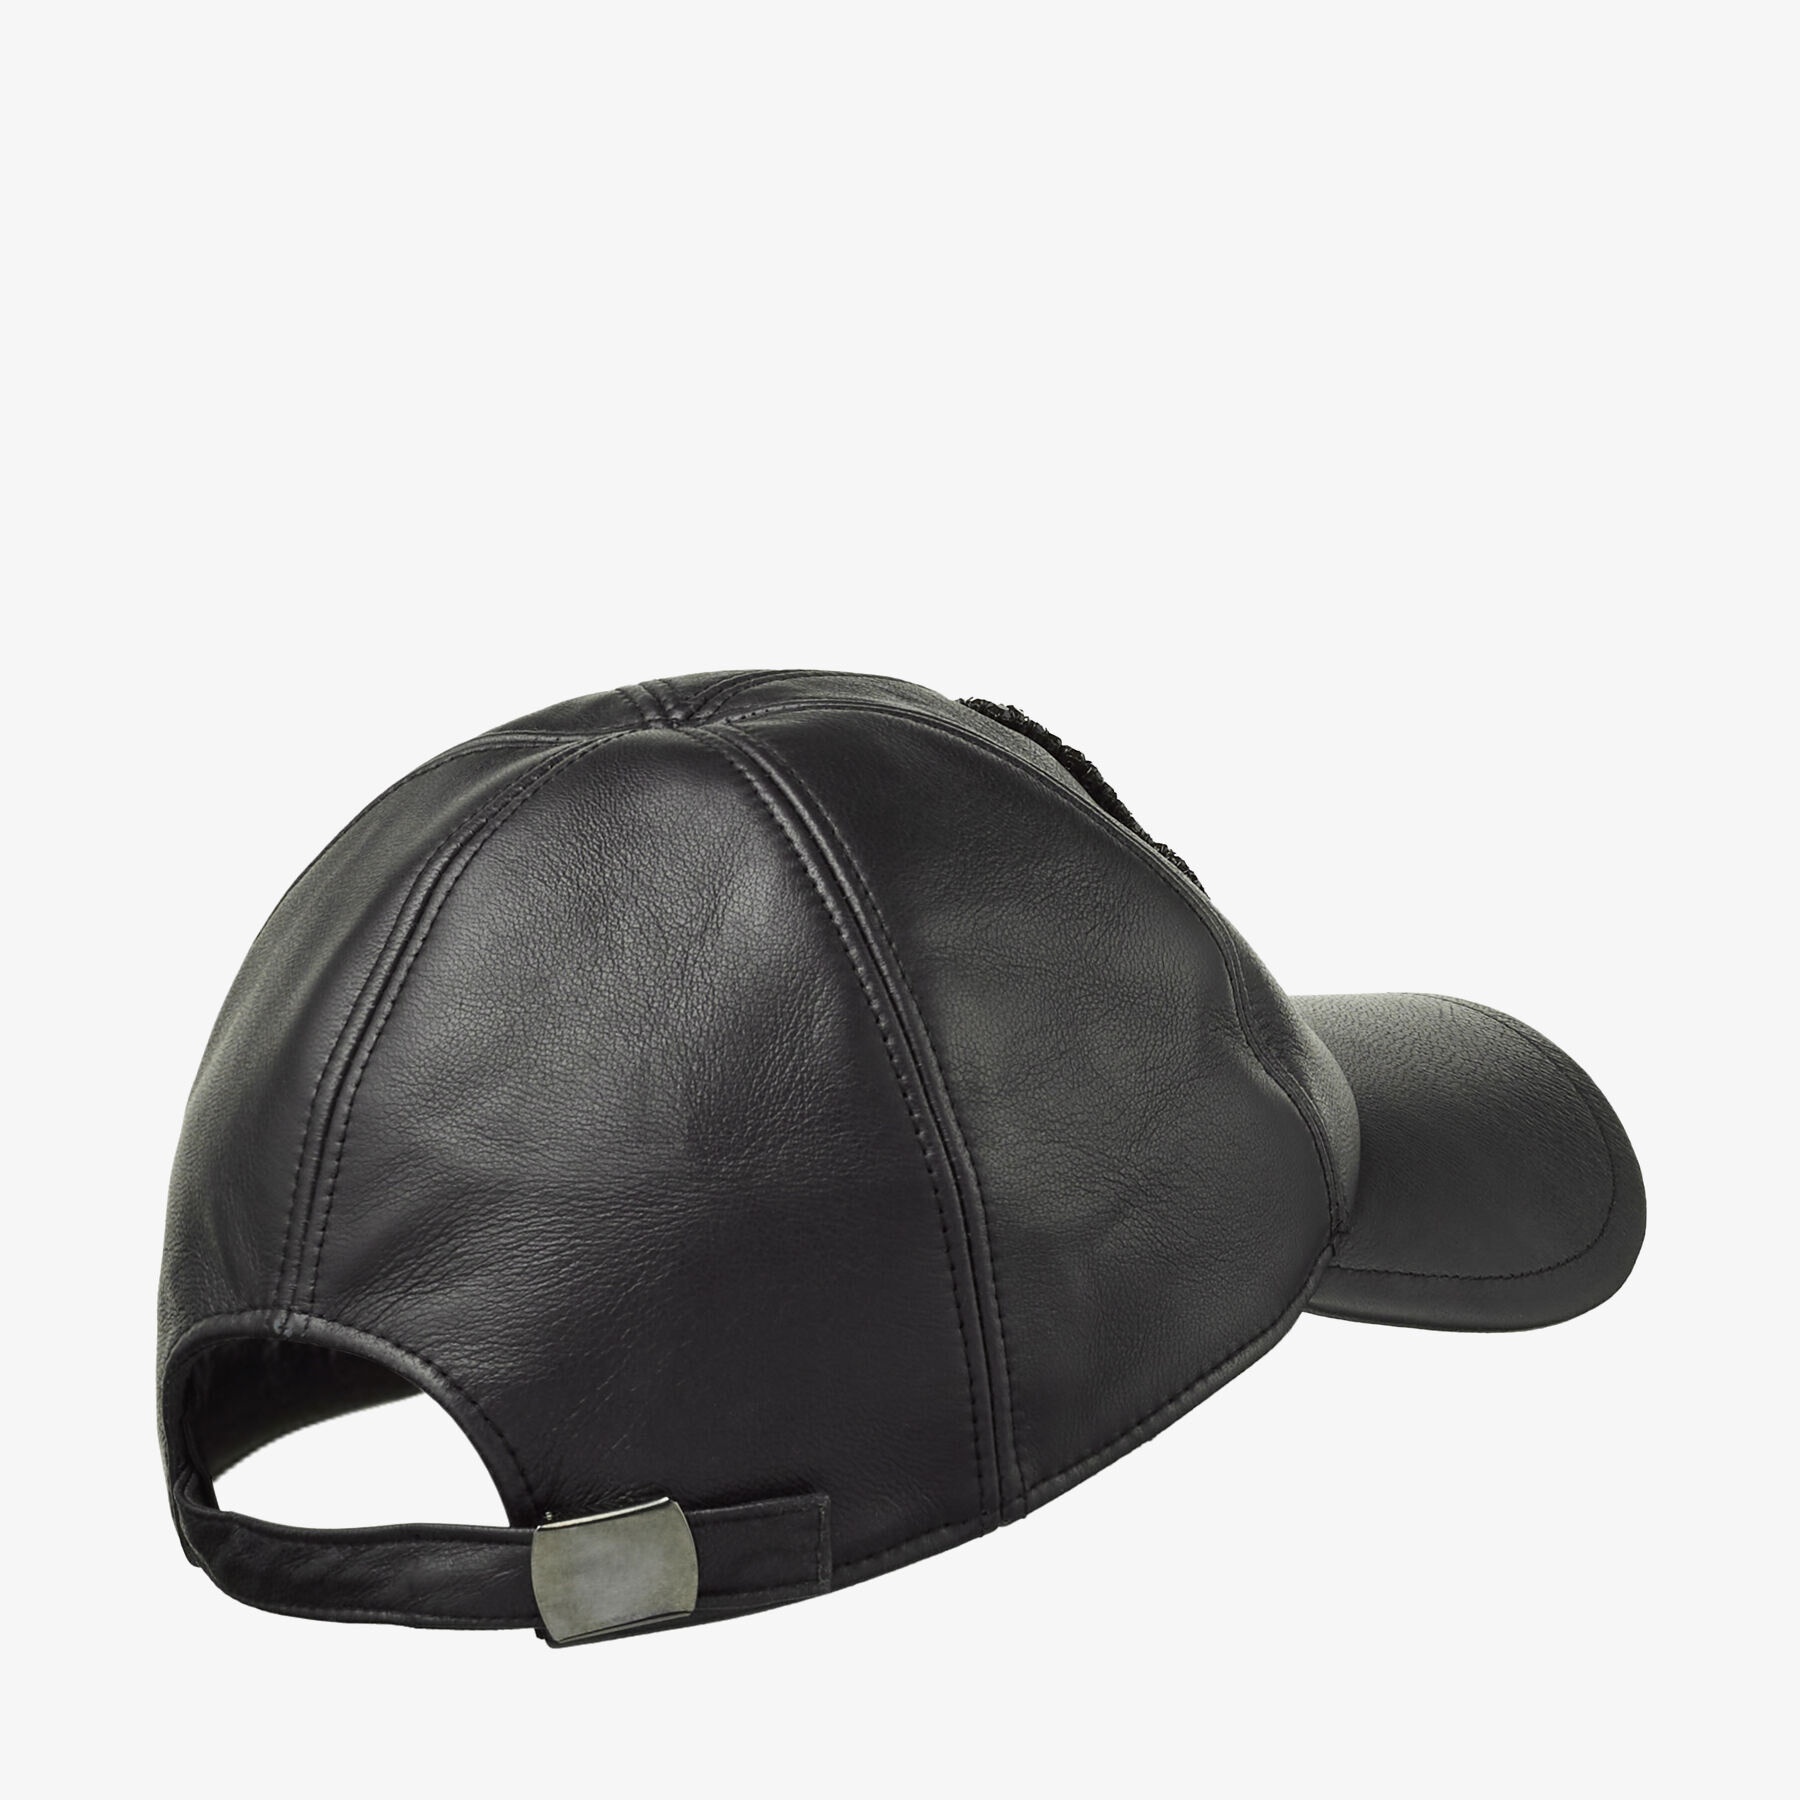 Saby
Black Leather Baseball Cap with Crystal JC Logo - 3